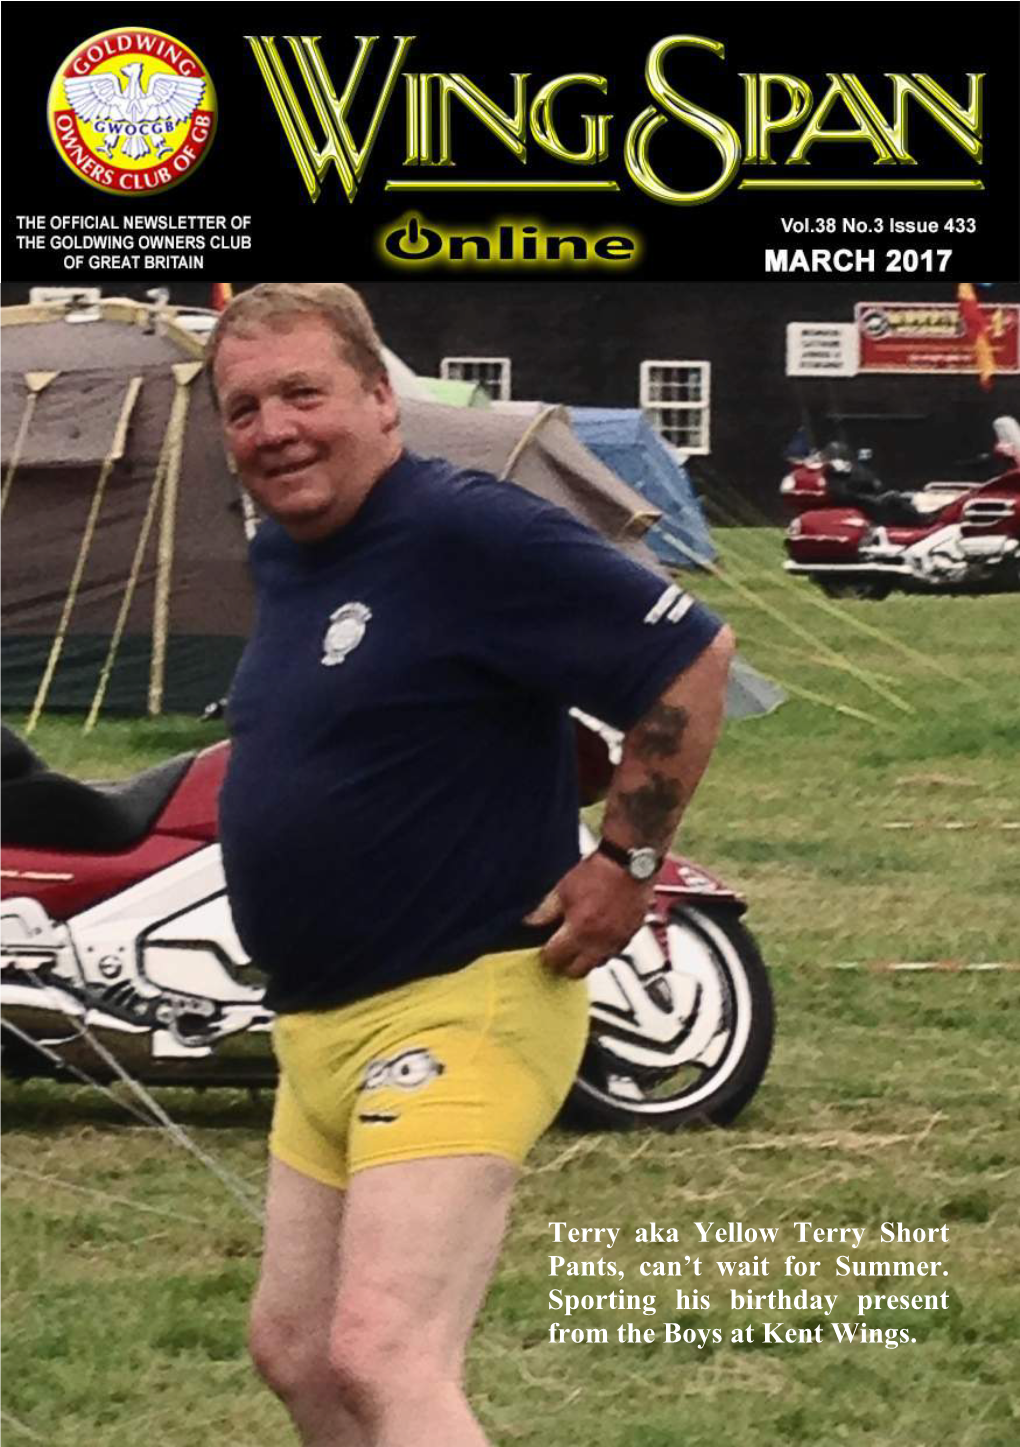 Terry Aka Yellow Terry Short Pants, Can't Wait for Summer. Sporting His